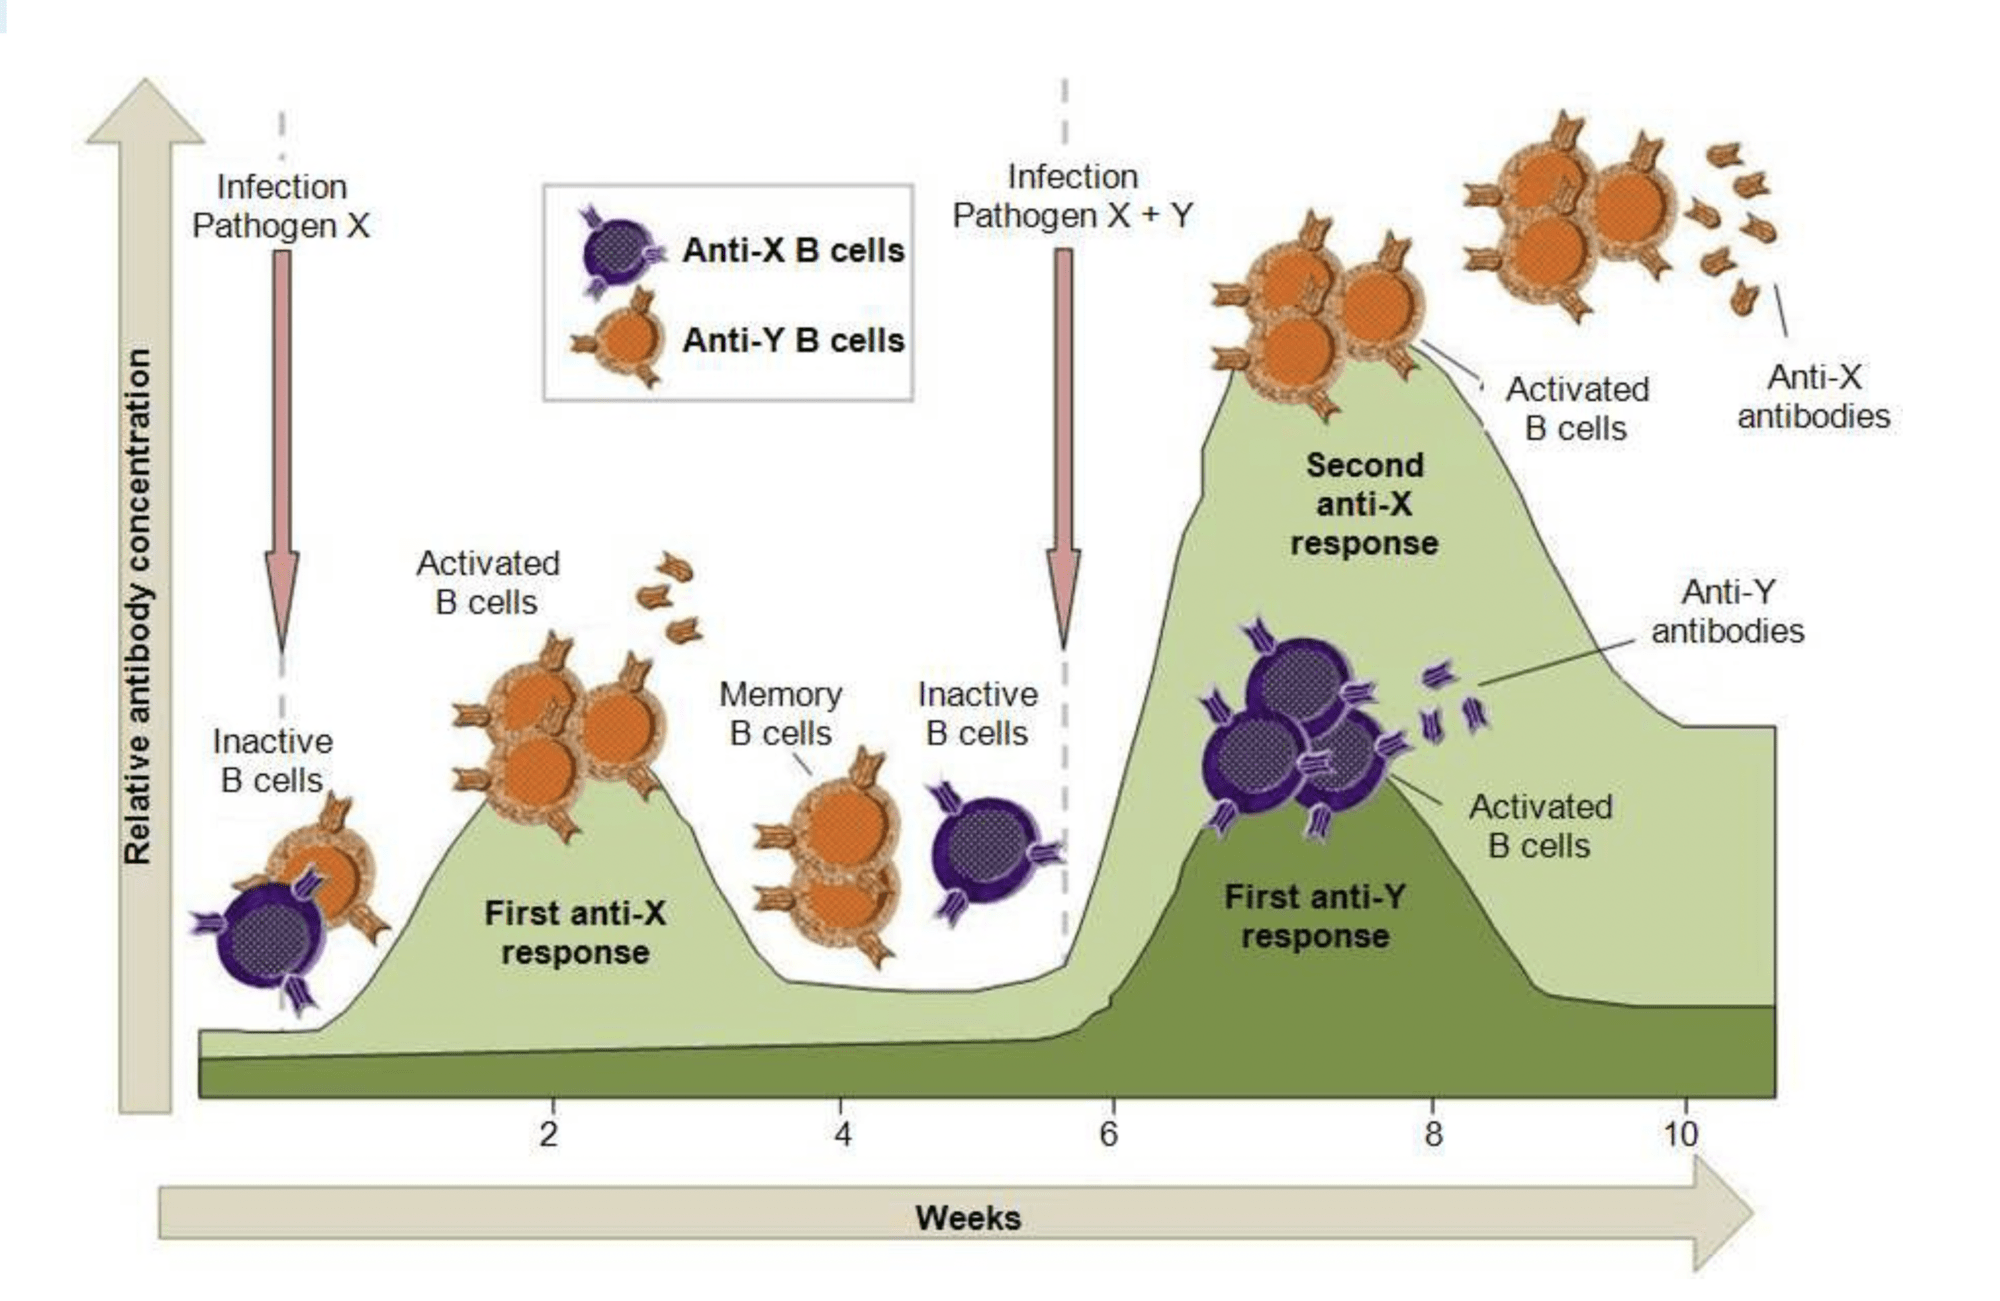 graph of relative antibody concentration vs. weeks